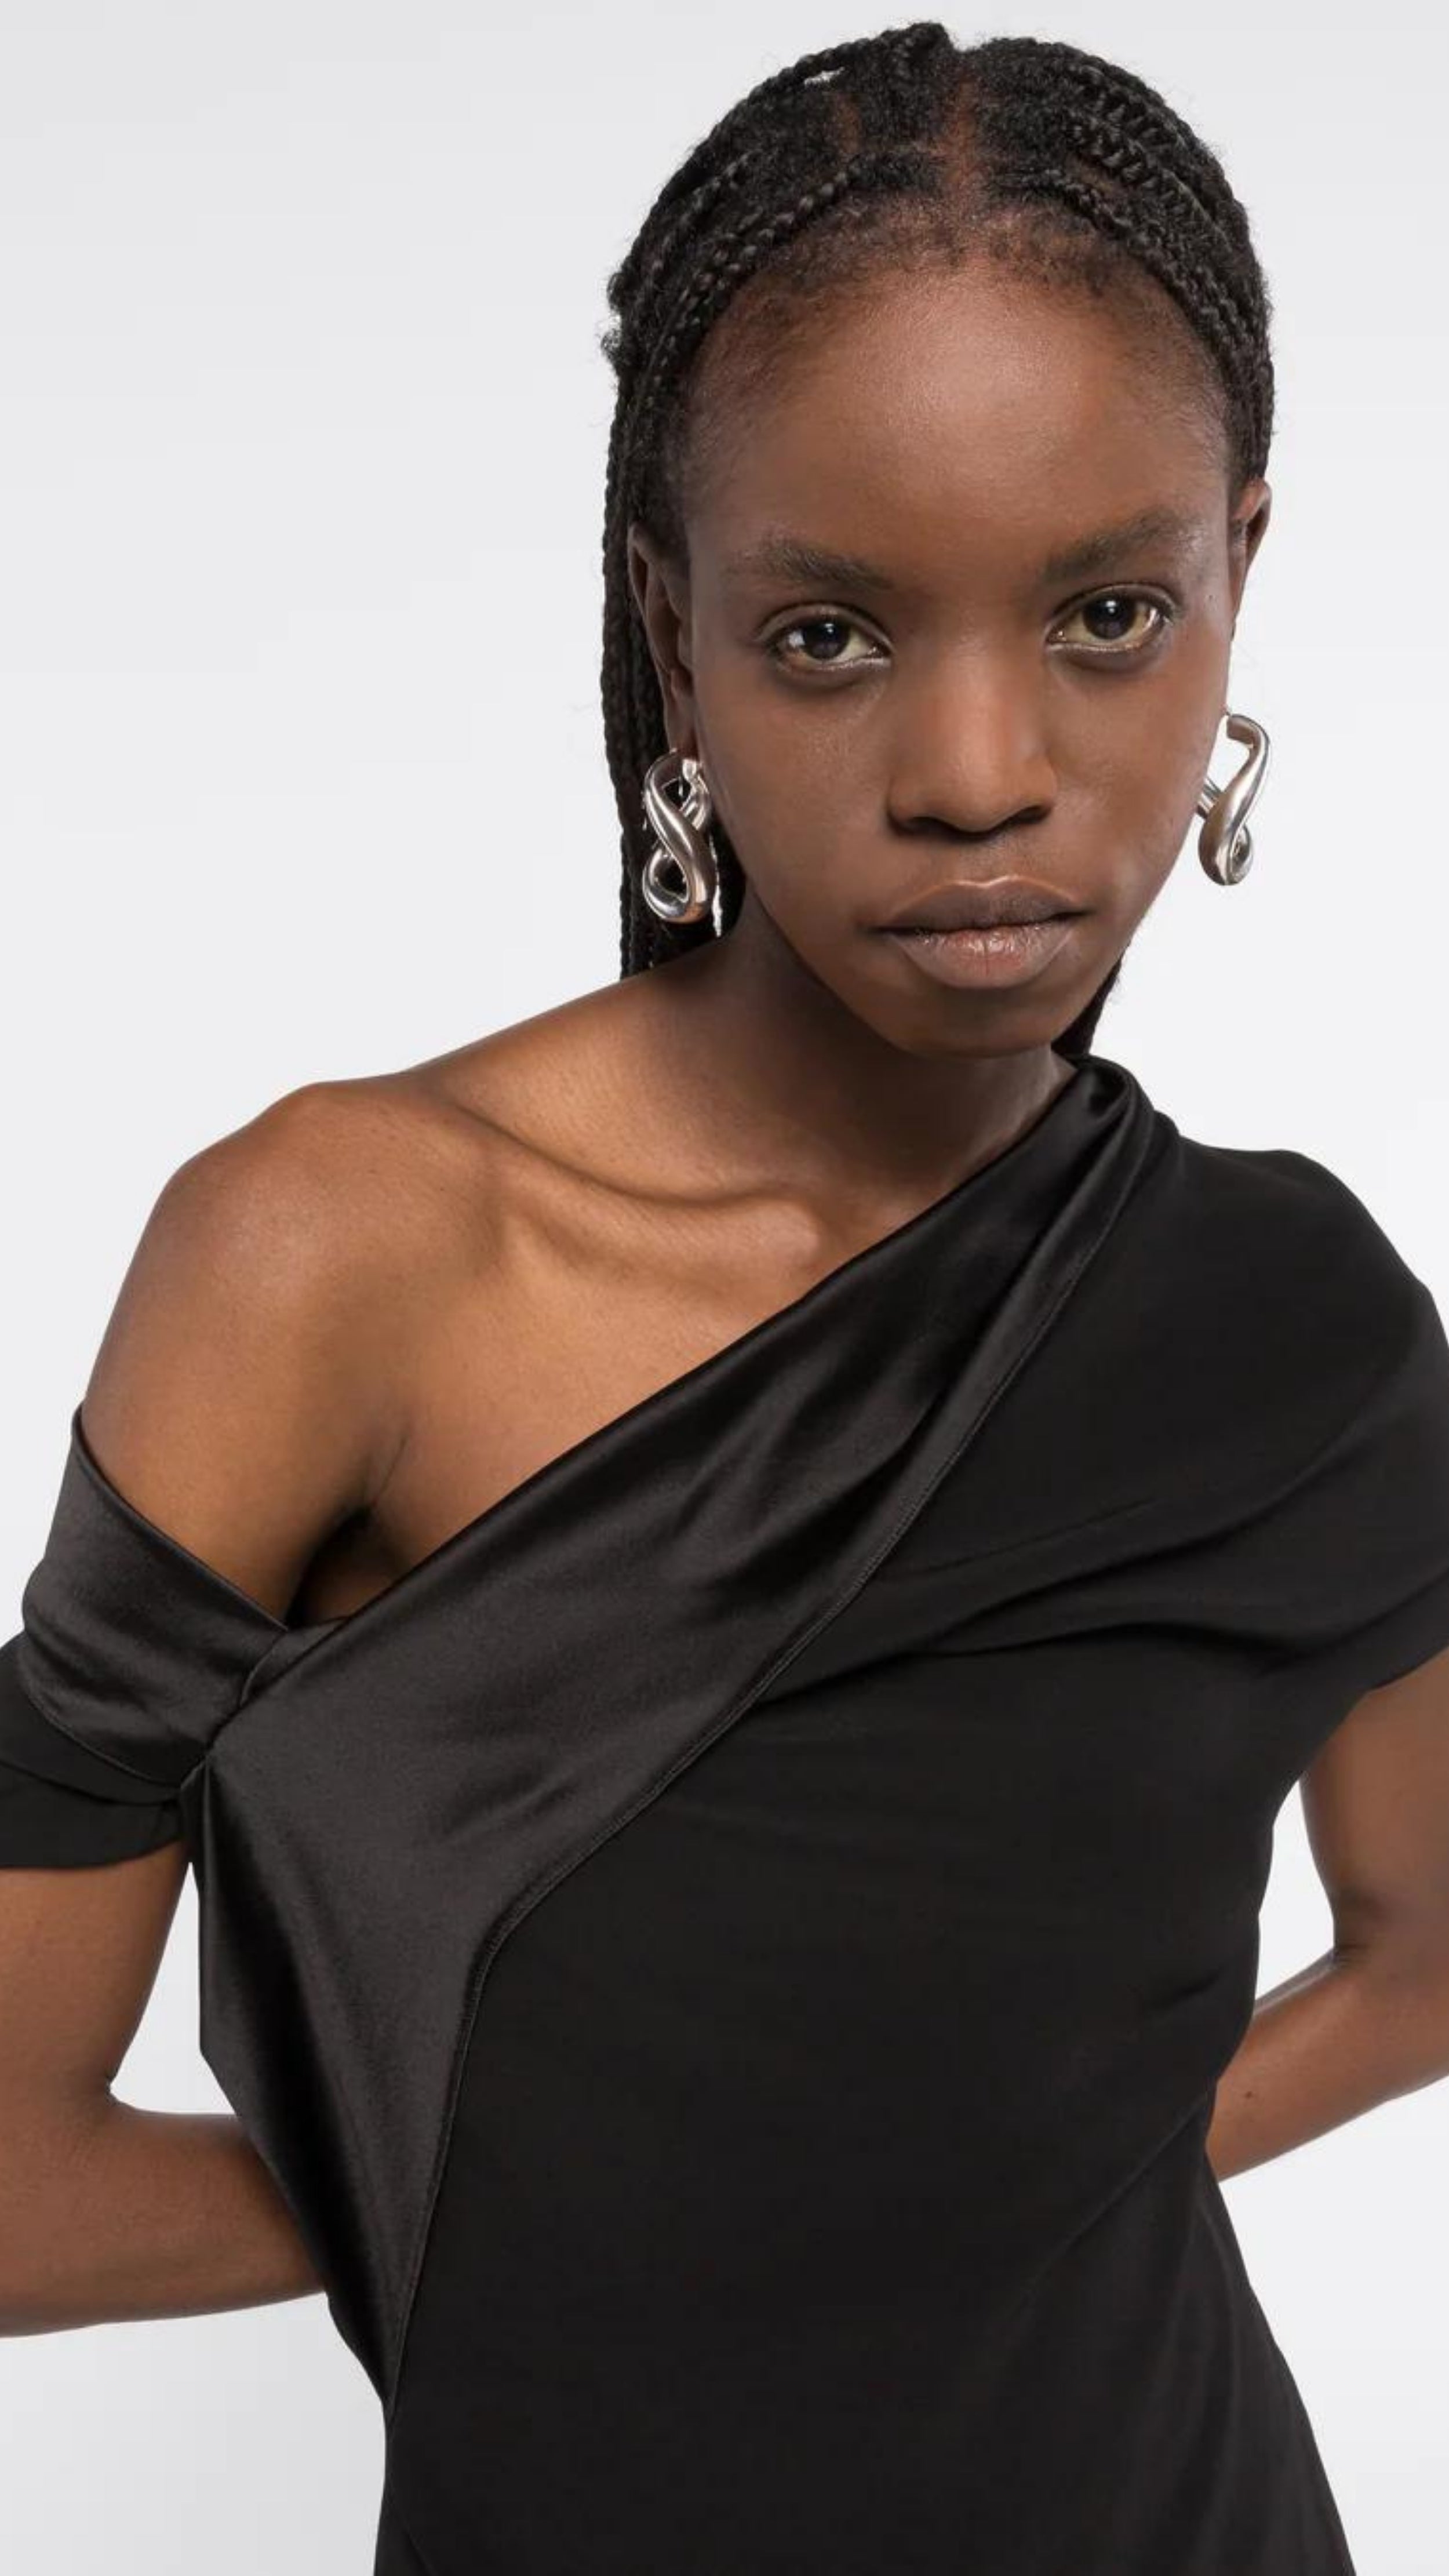 AZ Factory Colville Molly Molloy Lucinda Chambers, Draped Satin Top. Draped satin top with matte and shine satine fabric. Asymmetrical across the top to provide an off the shoulder style on one side. Shown in model with detail close up of the neckline.